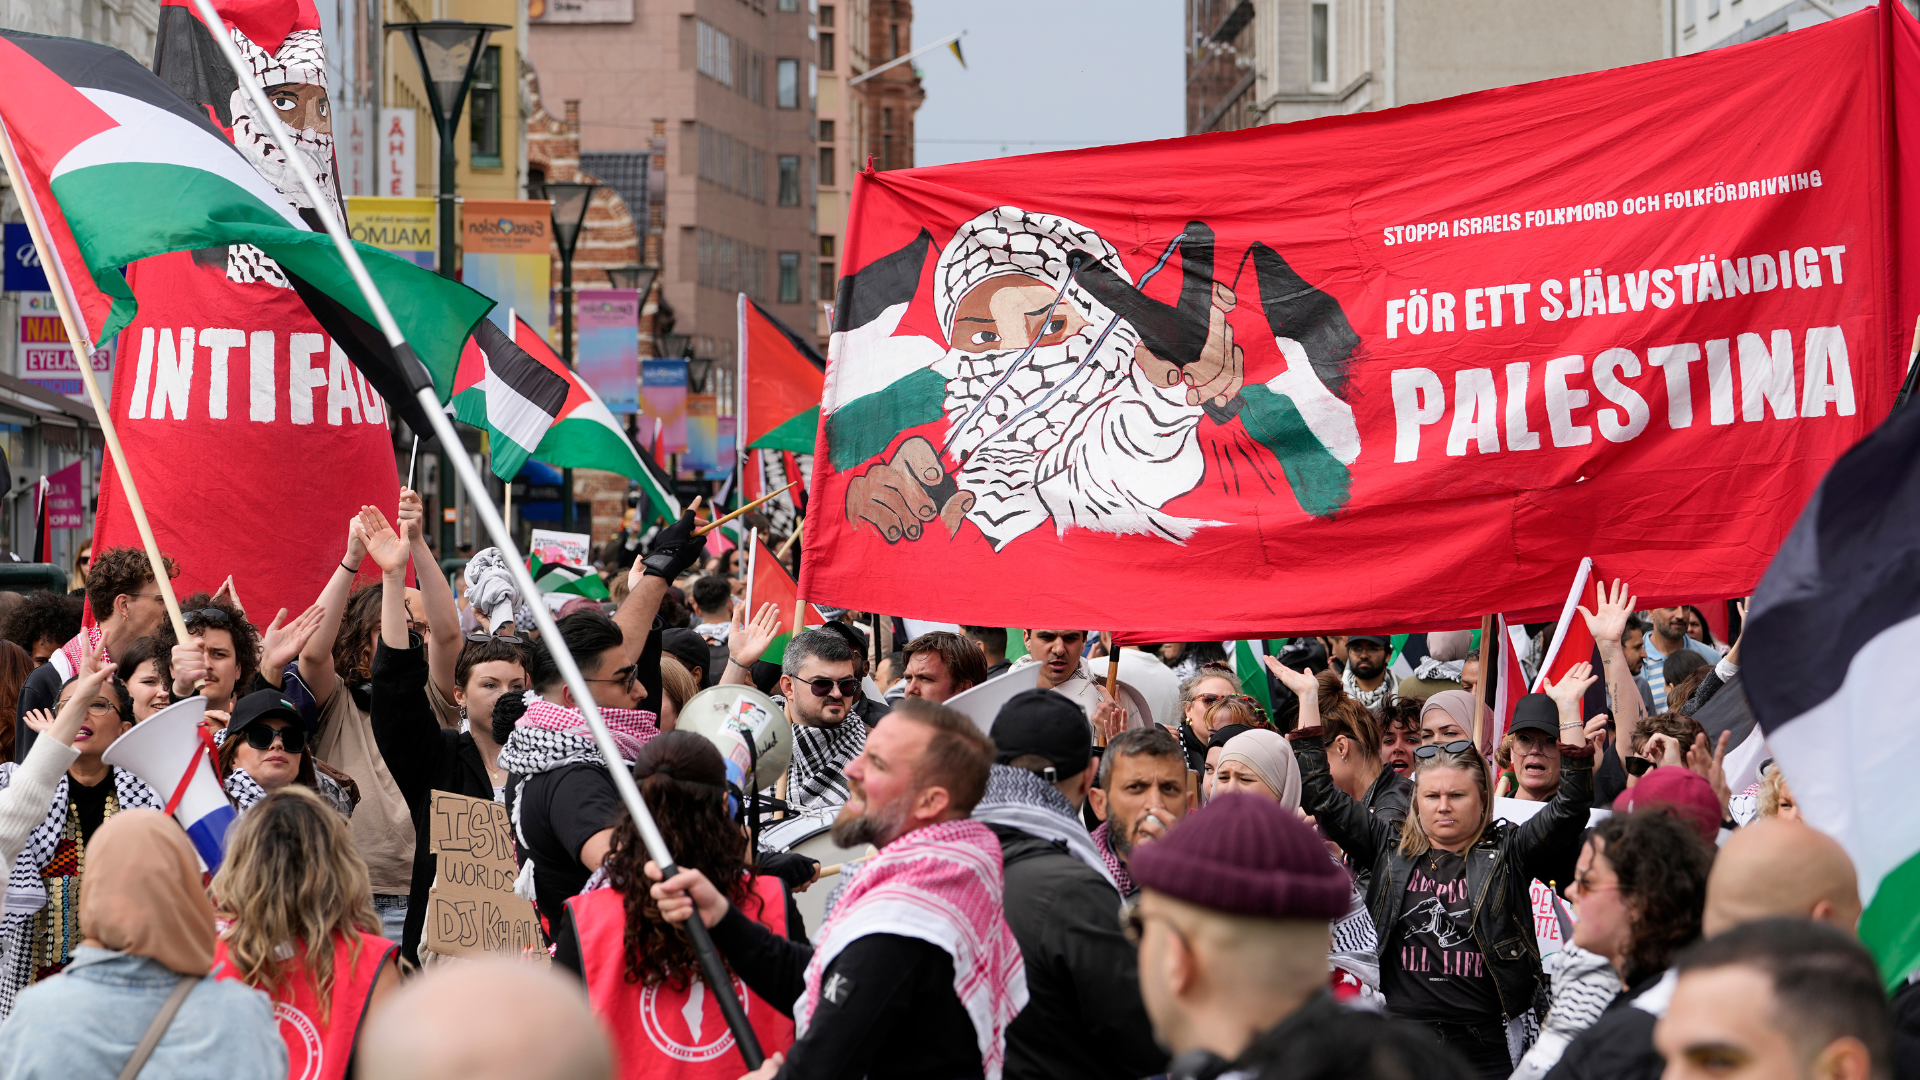 People carry a banner with the words in Swedish 'For an independent Palestine' during a Pro-Palestinian demonstration for excluding Israel from Eurovision. /Martin Meissner/AP